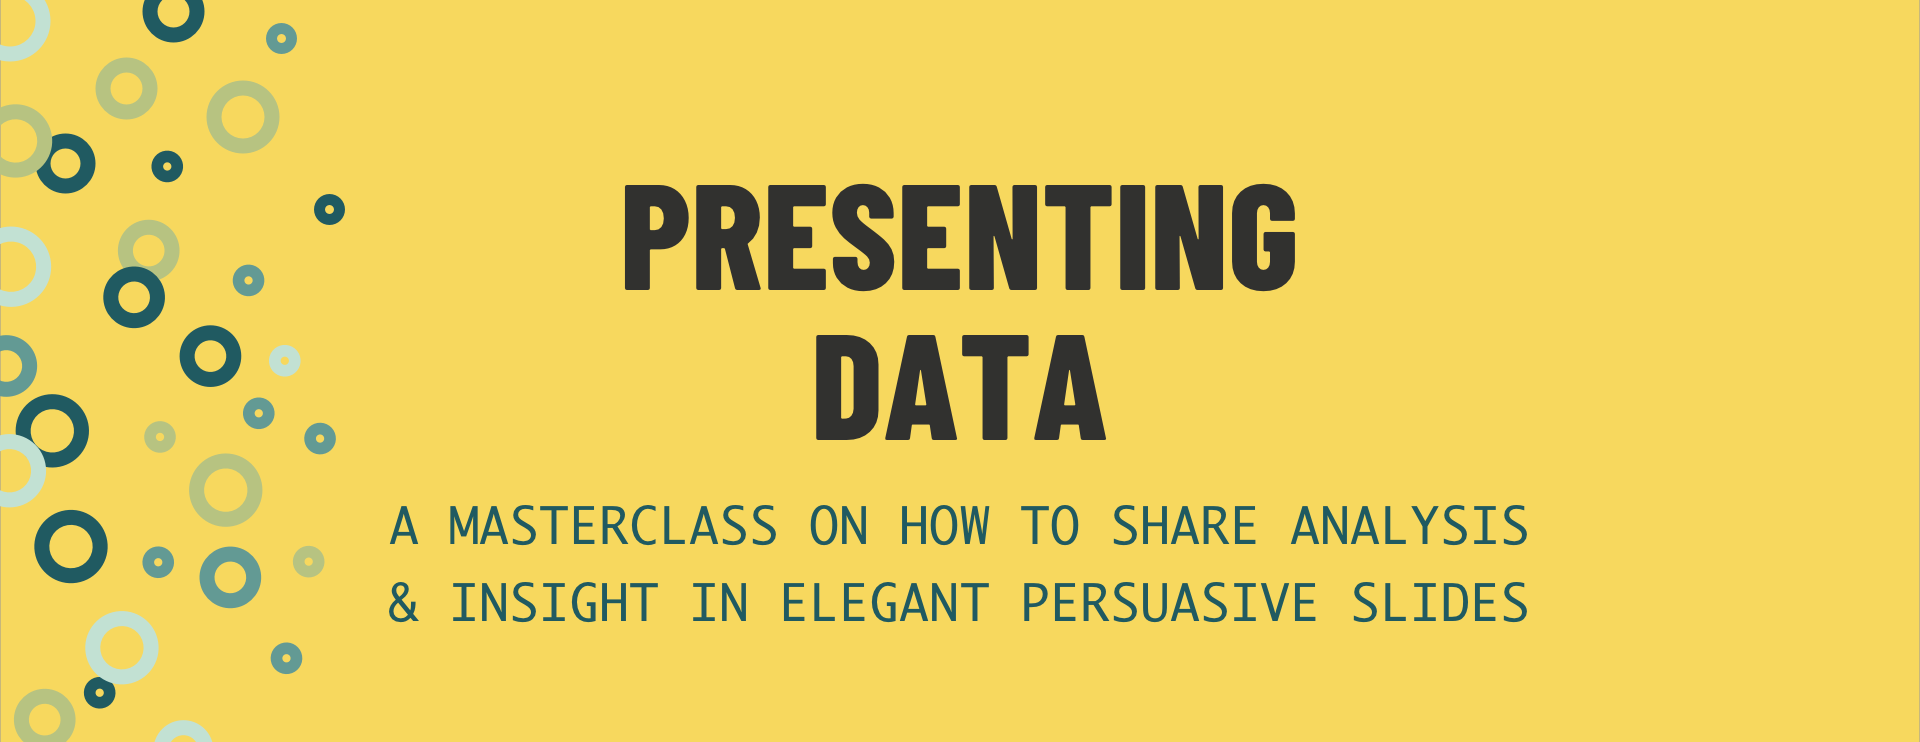 Presenting data and insight